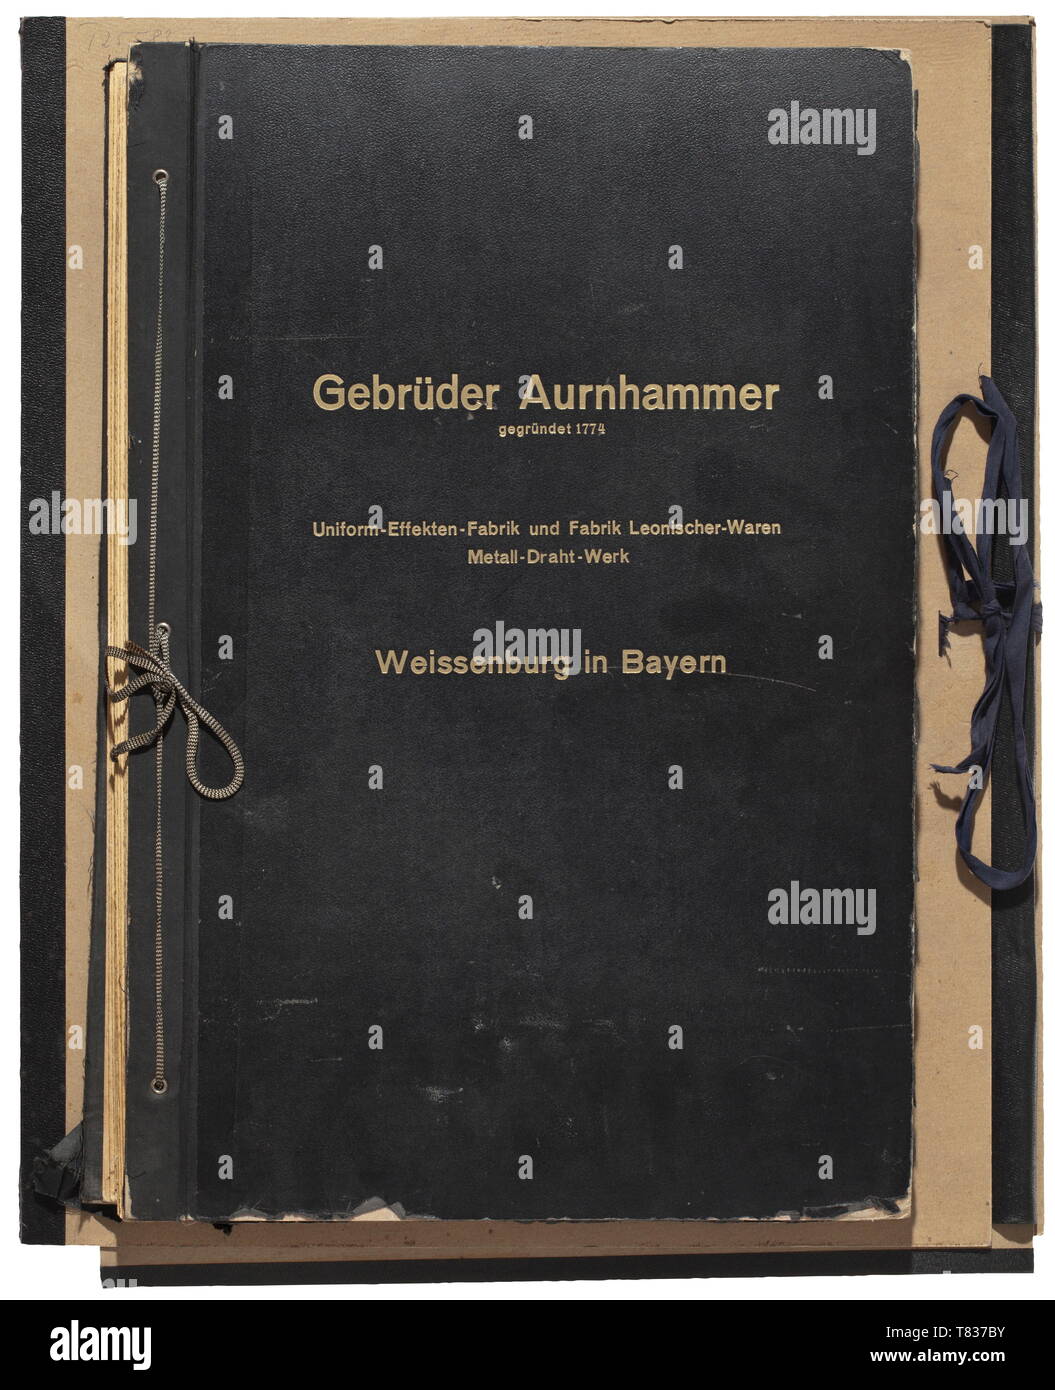 Sample boards of uniform insignia of the supply firm 'Gebrüder Aurnhammer' from Weissenburg in Bavaria. A total of 94 naval career- and special training badges of the Kriegsmarine, glued-on, a few badges missing. The boards with description, in its original protective cardboard box (slightly damaged). Among the insignia are very rare badges such as 'U-Boots- und Bergungstaucher' (a U-boat- and salvage diver) and 'Hoboisten-Maat' (a military musician). The badges are on white or navy blue cotton base cloth, some on multi-coloured machine-woven appliqués. An interesting group, Editorial-Use-Only Stock Photo